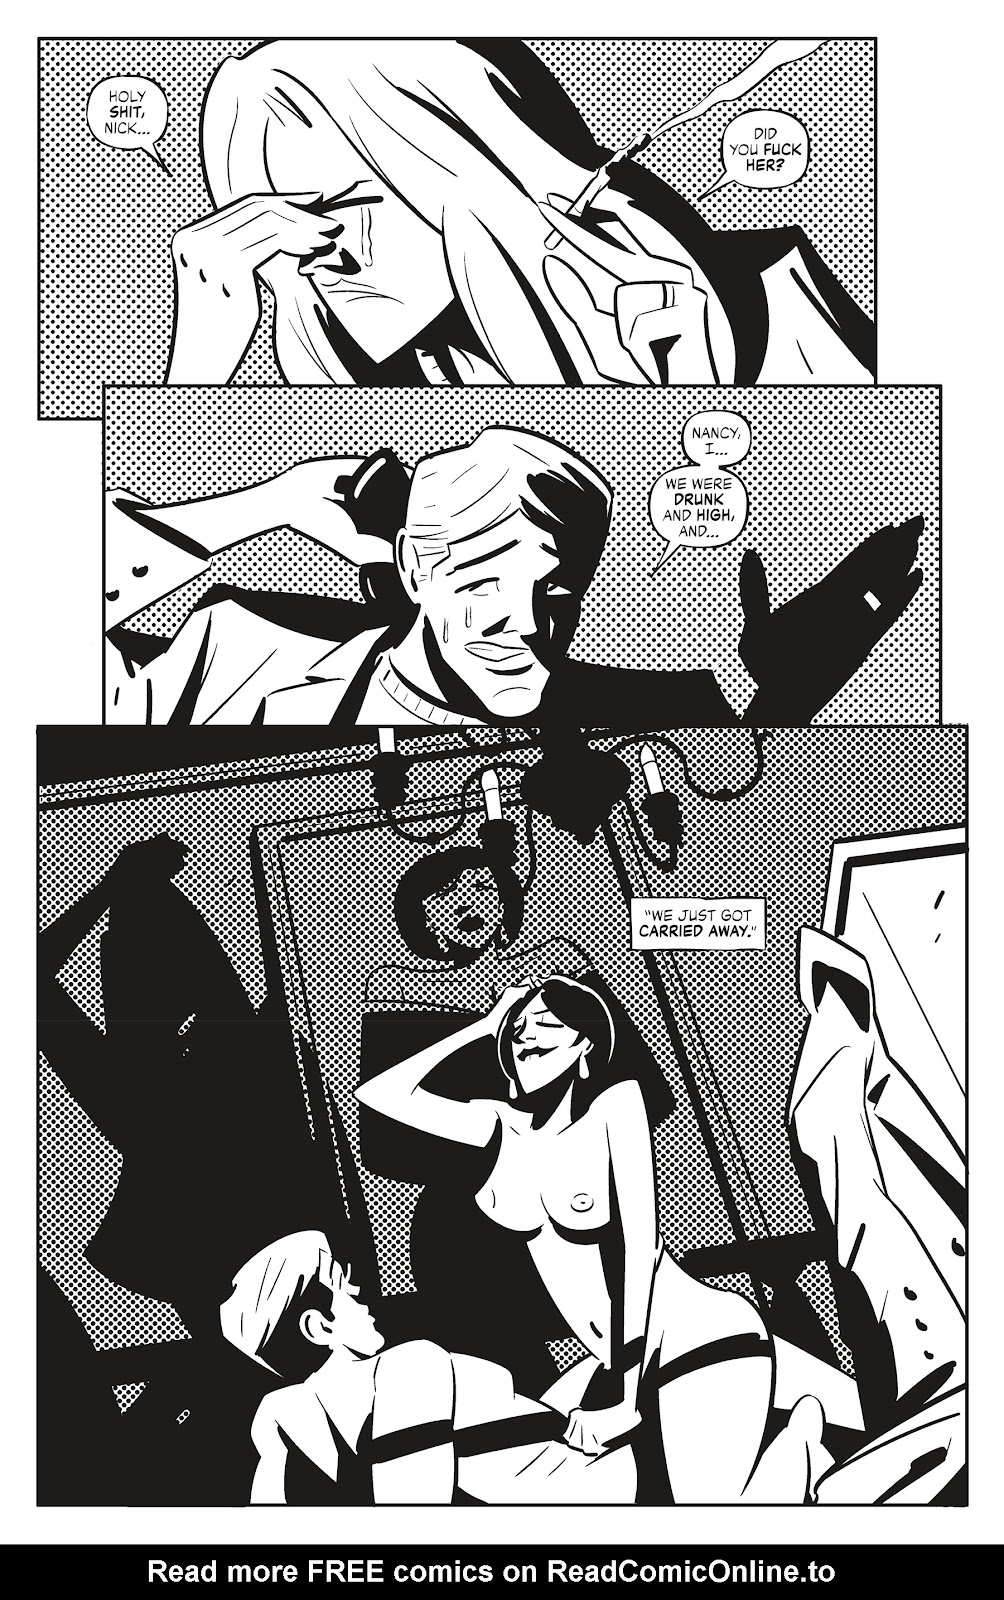 Quick Stops Vol. 2 issue 2 - Page 9